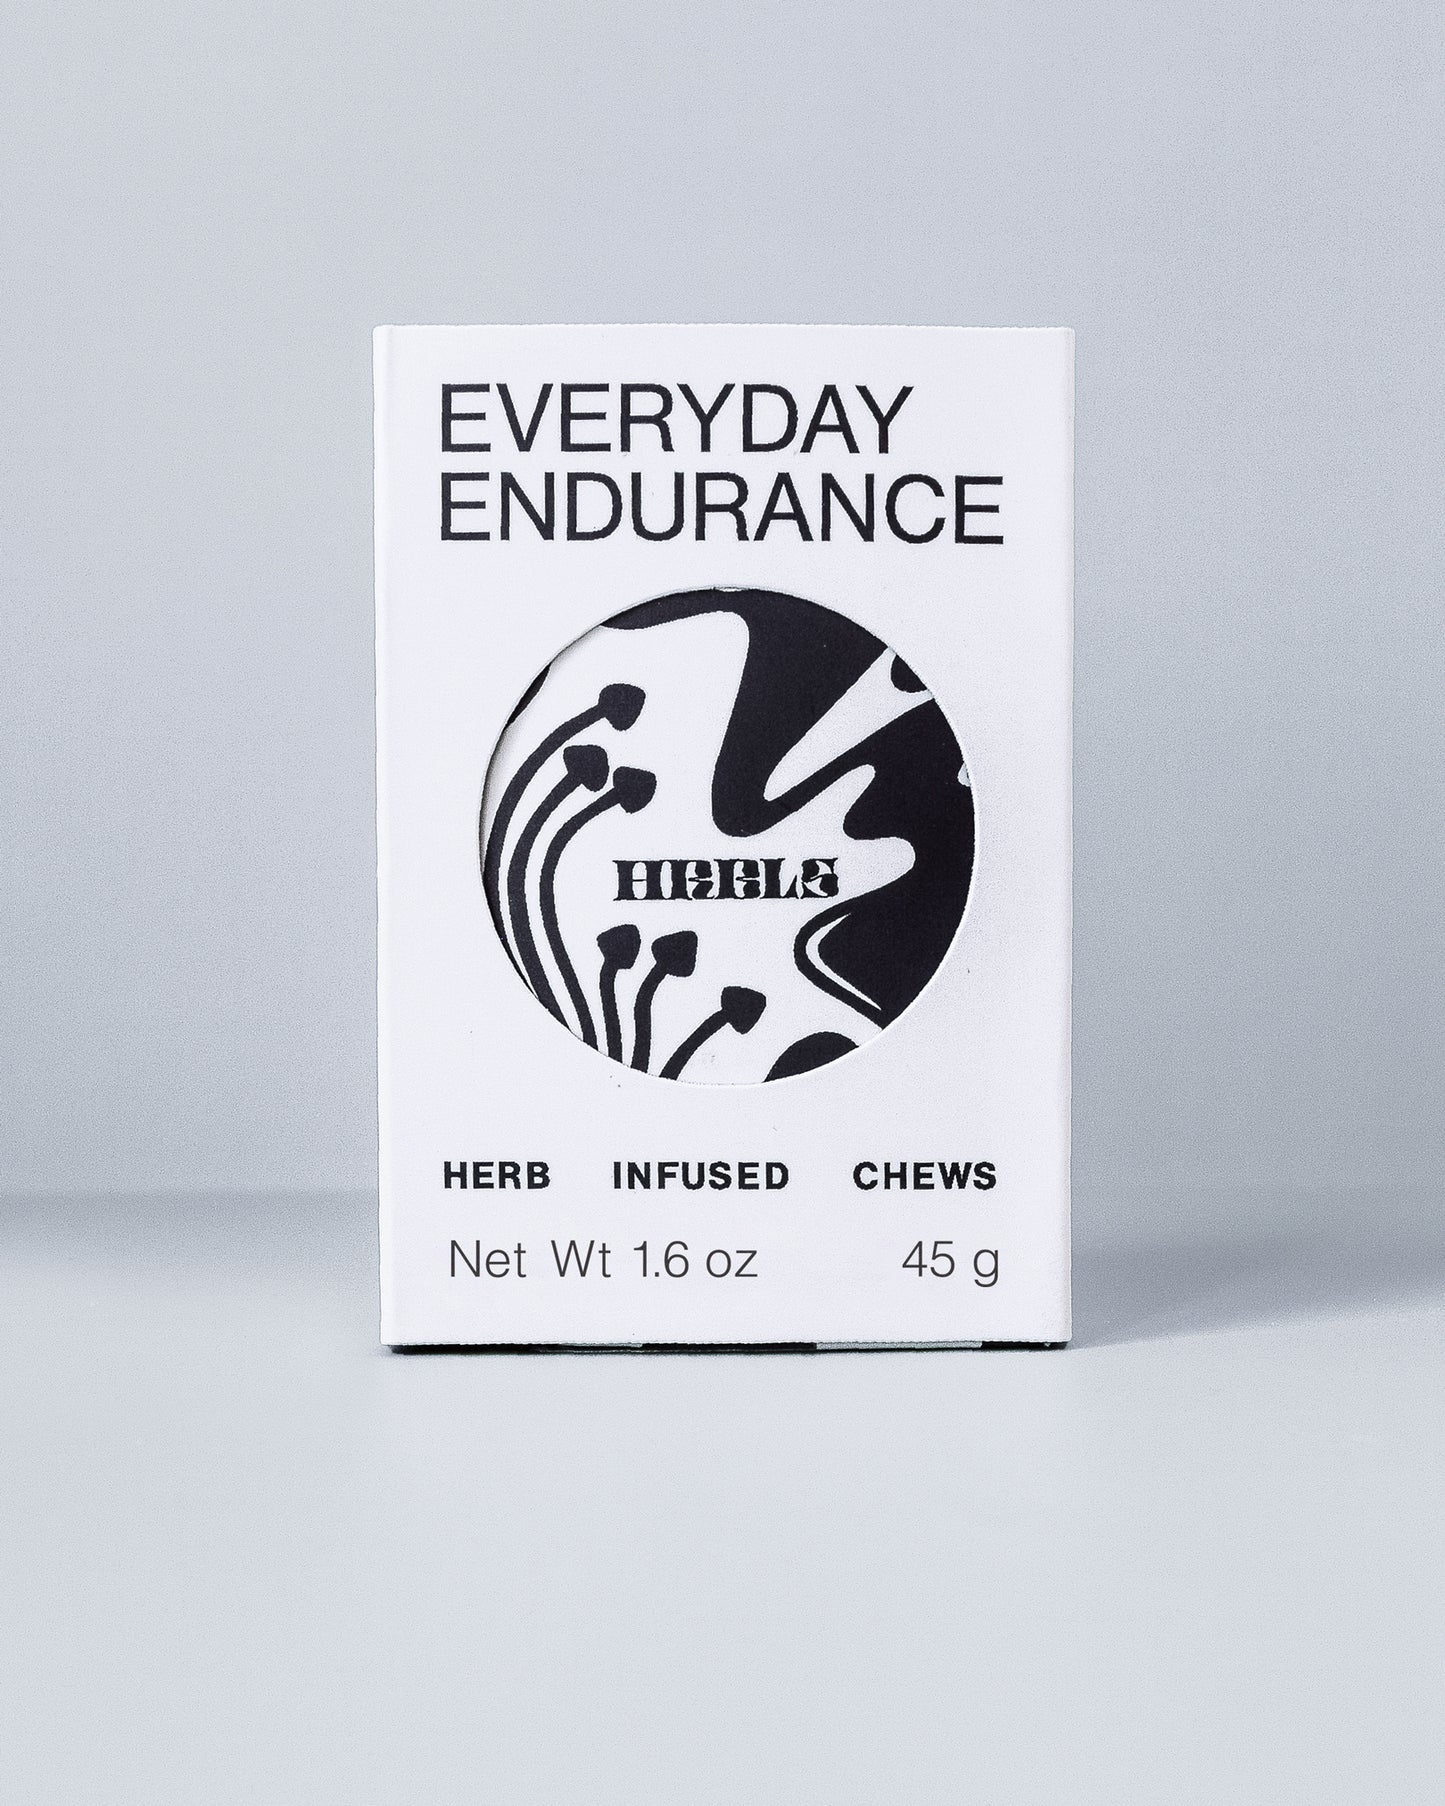 HRBLS Supernatural Herbal Gummies in Everyday Endurance available at Lahn.shop